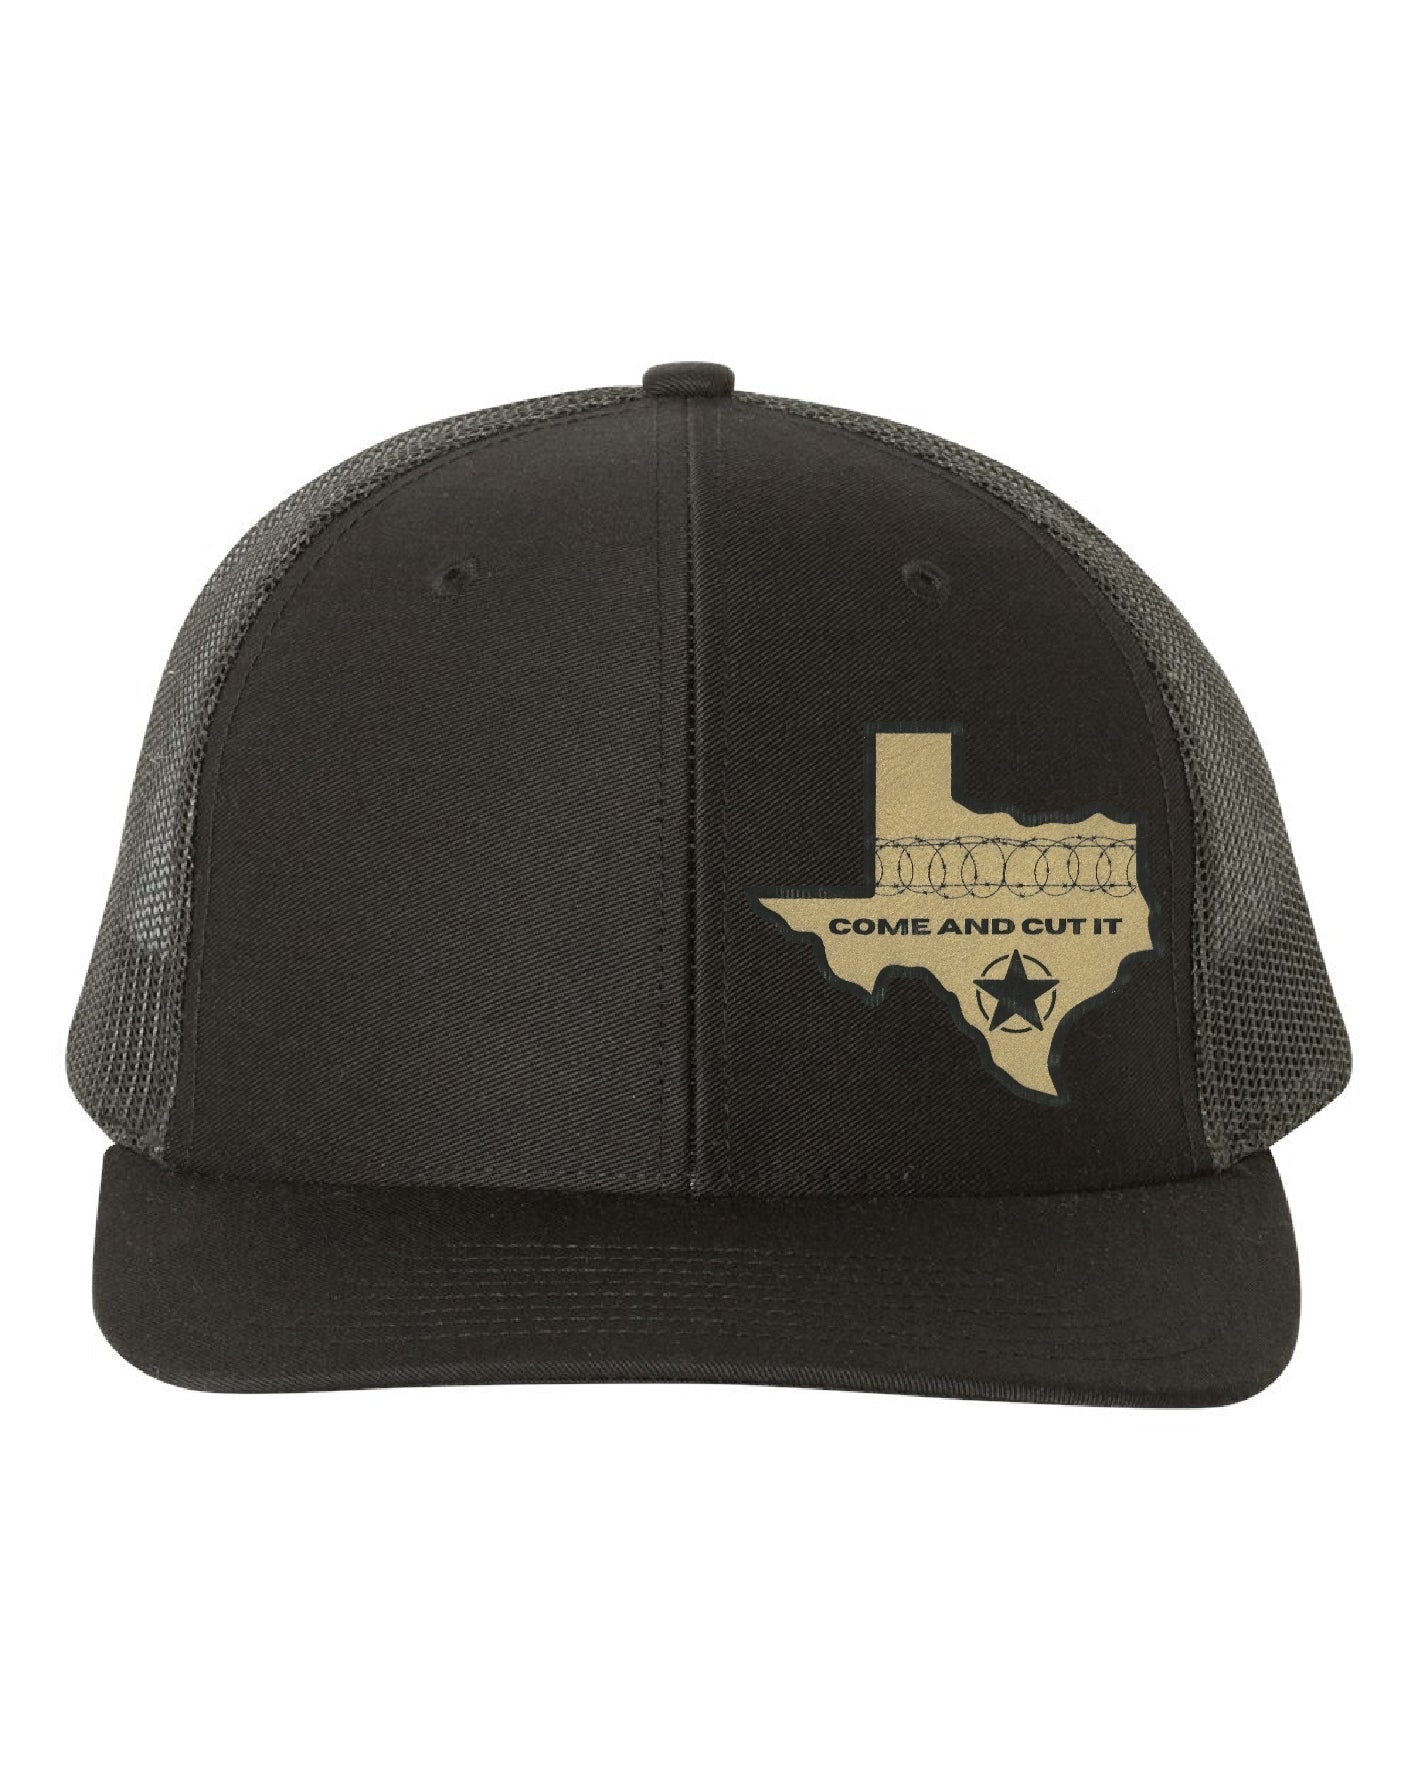 Texas Come And Cut It, Patriotic, Snapback, Richardson 112, Laser Engraved Leather, Gift for him or her